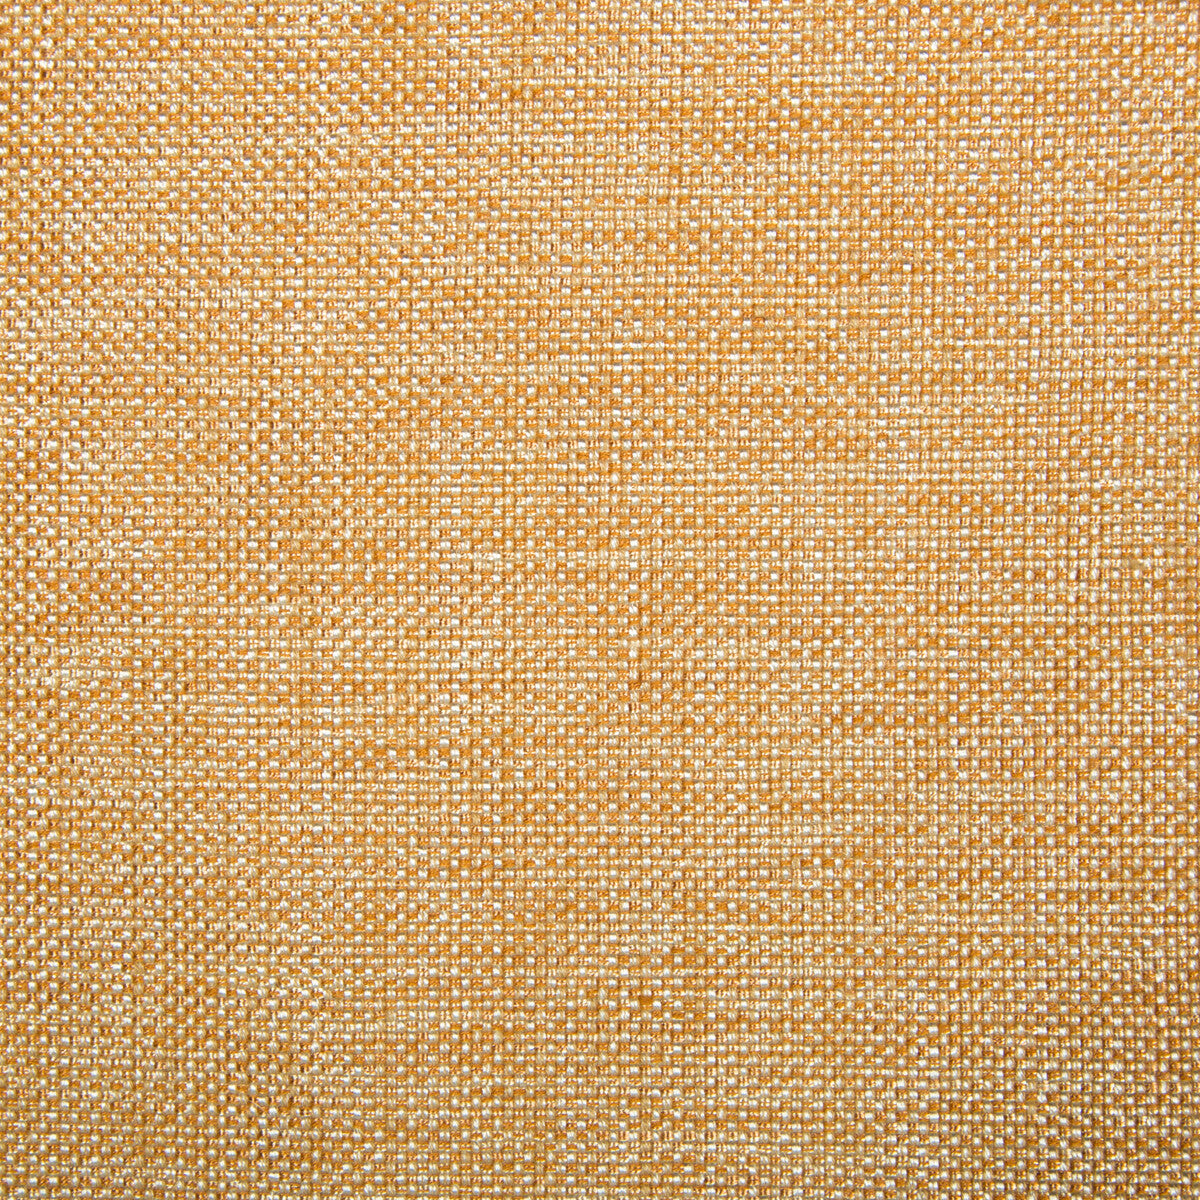 Kravet Contract fabric in 34926-1211 color - pattern 34926.1211.0 - by Kravet Contract